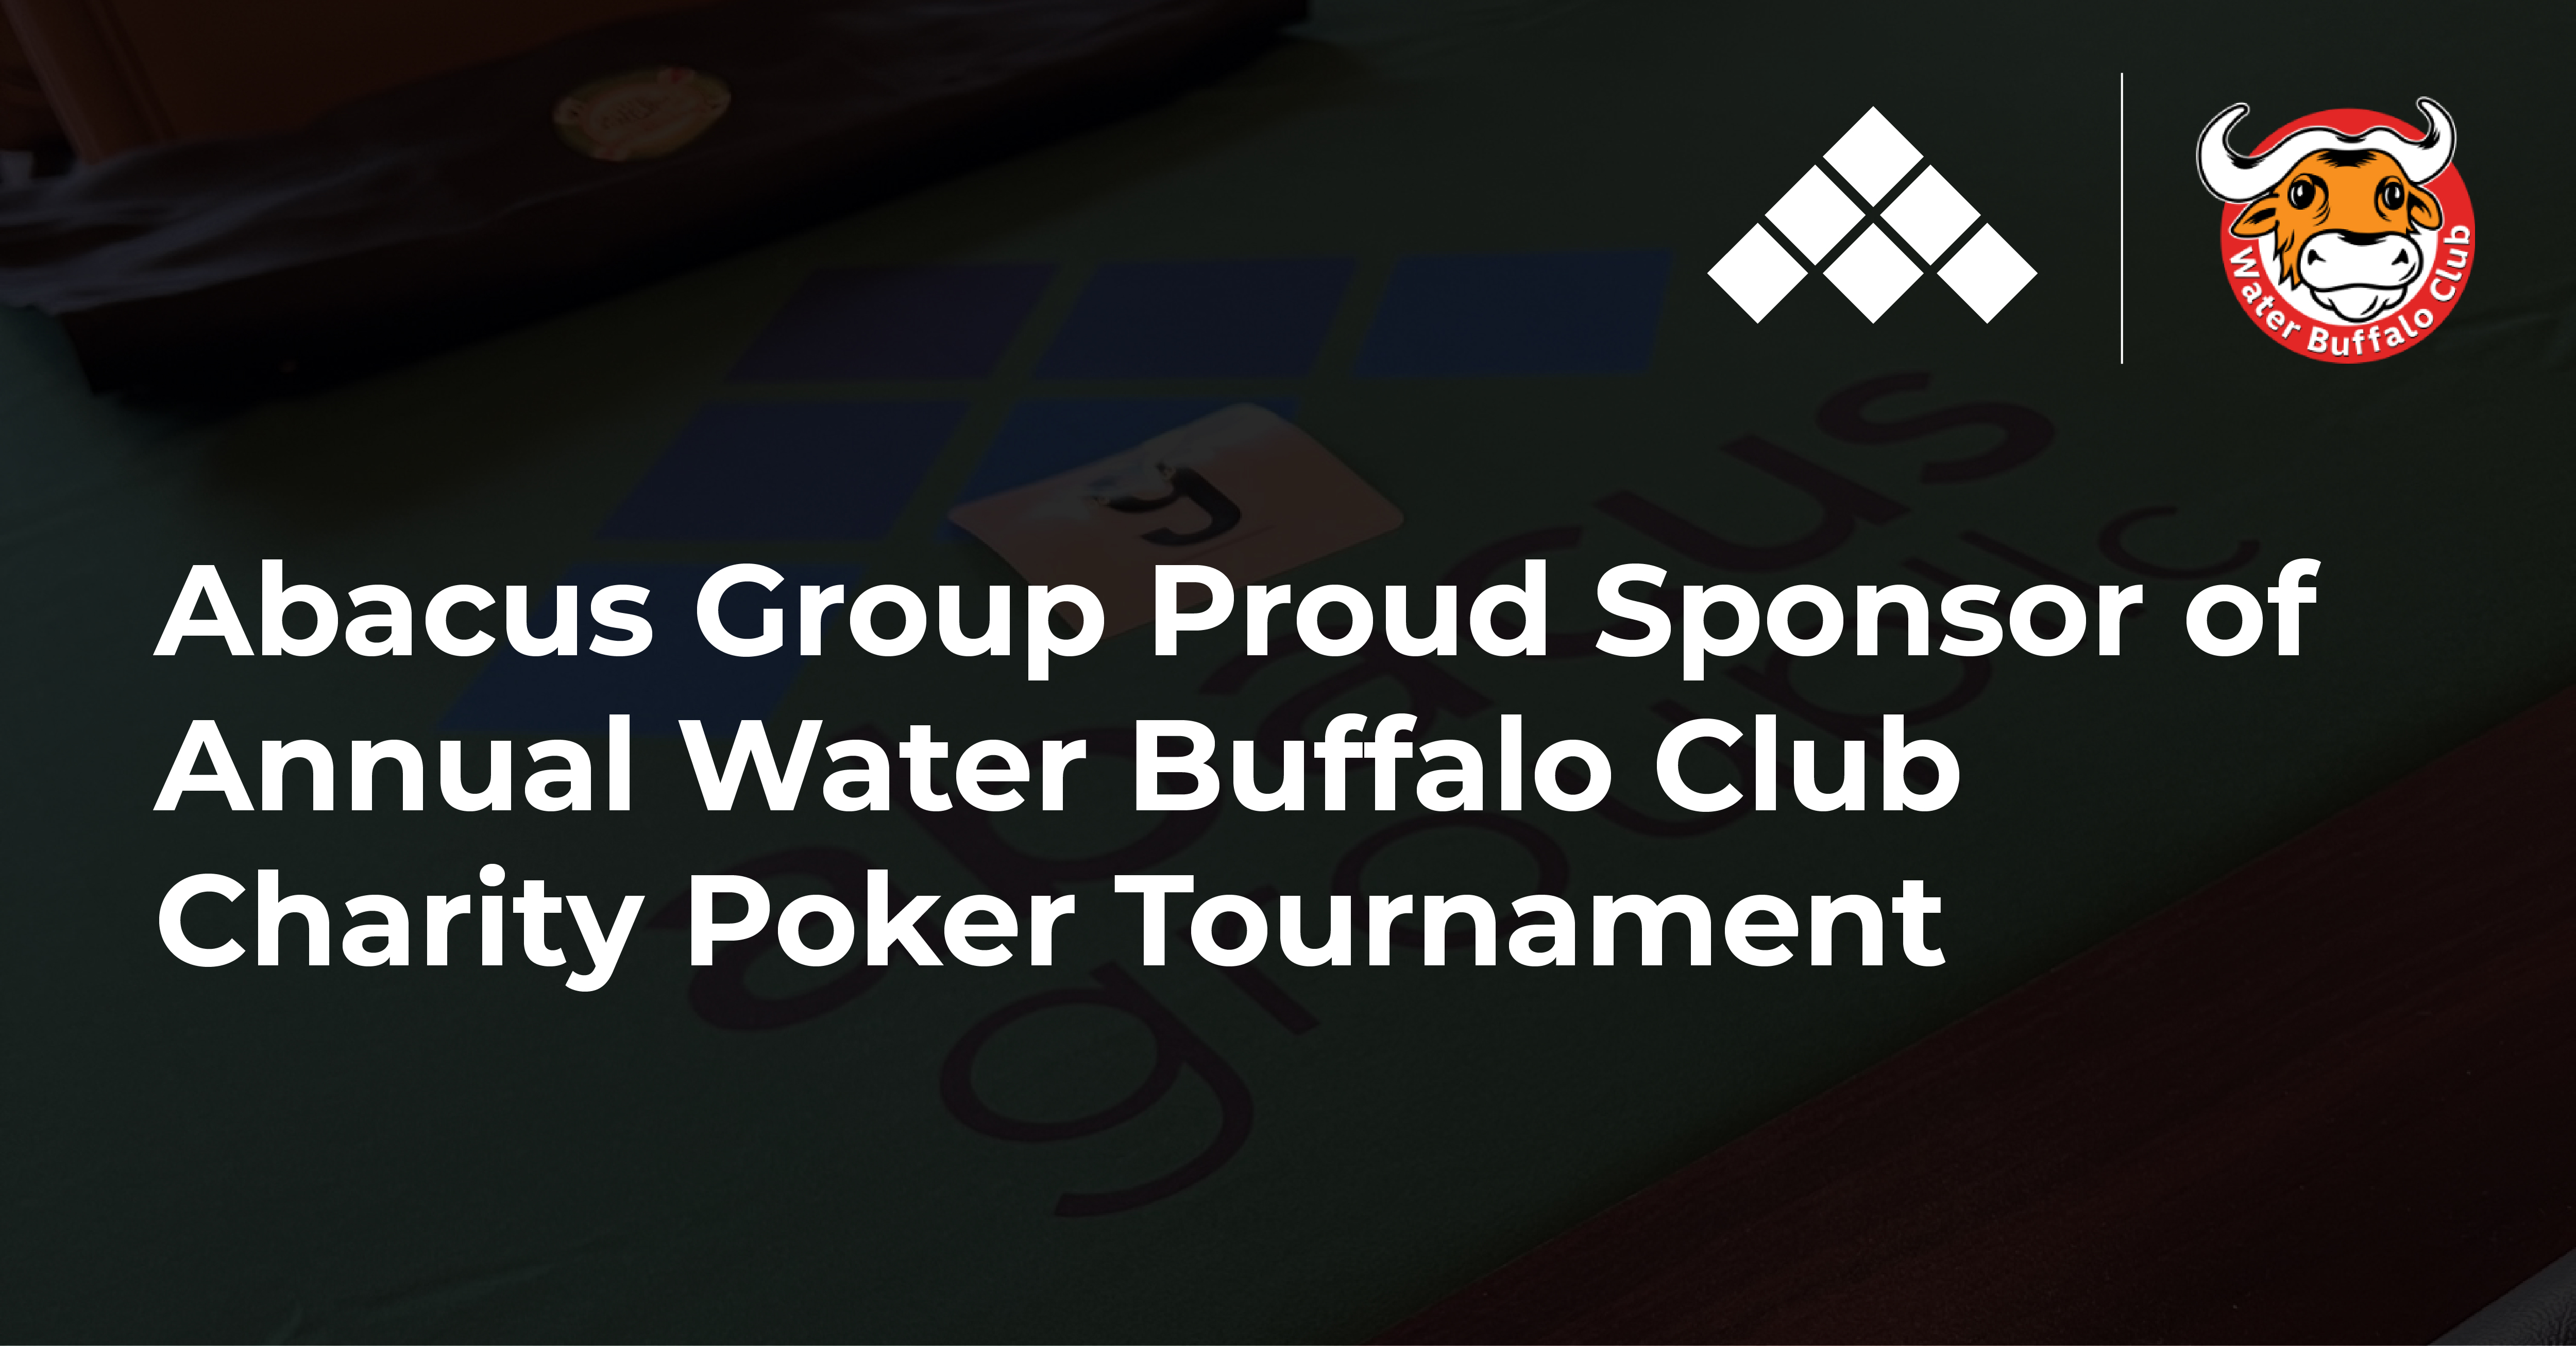 Abacus Group Proud Sponsor of Annual Water Buffalo Club Charity Poker Tournament